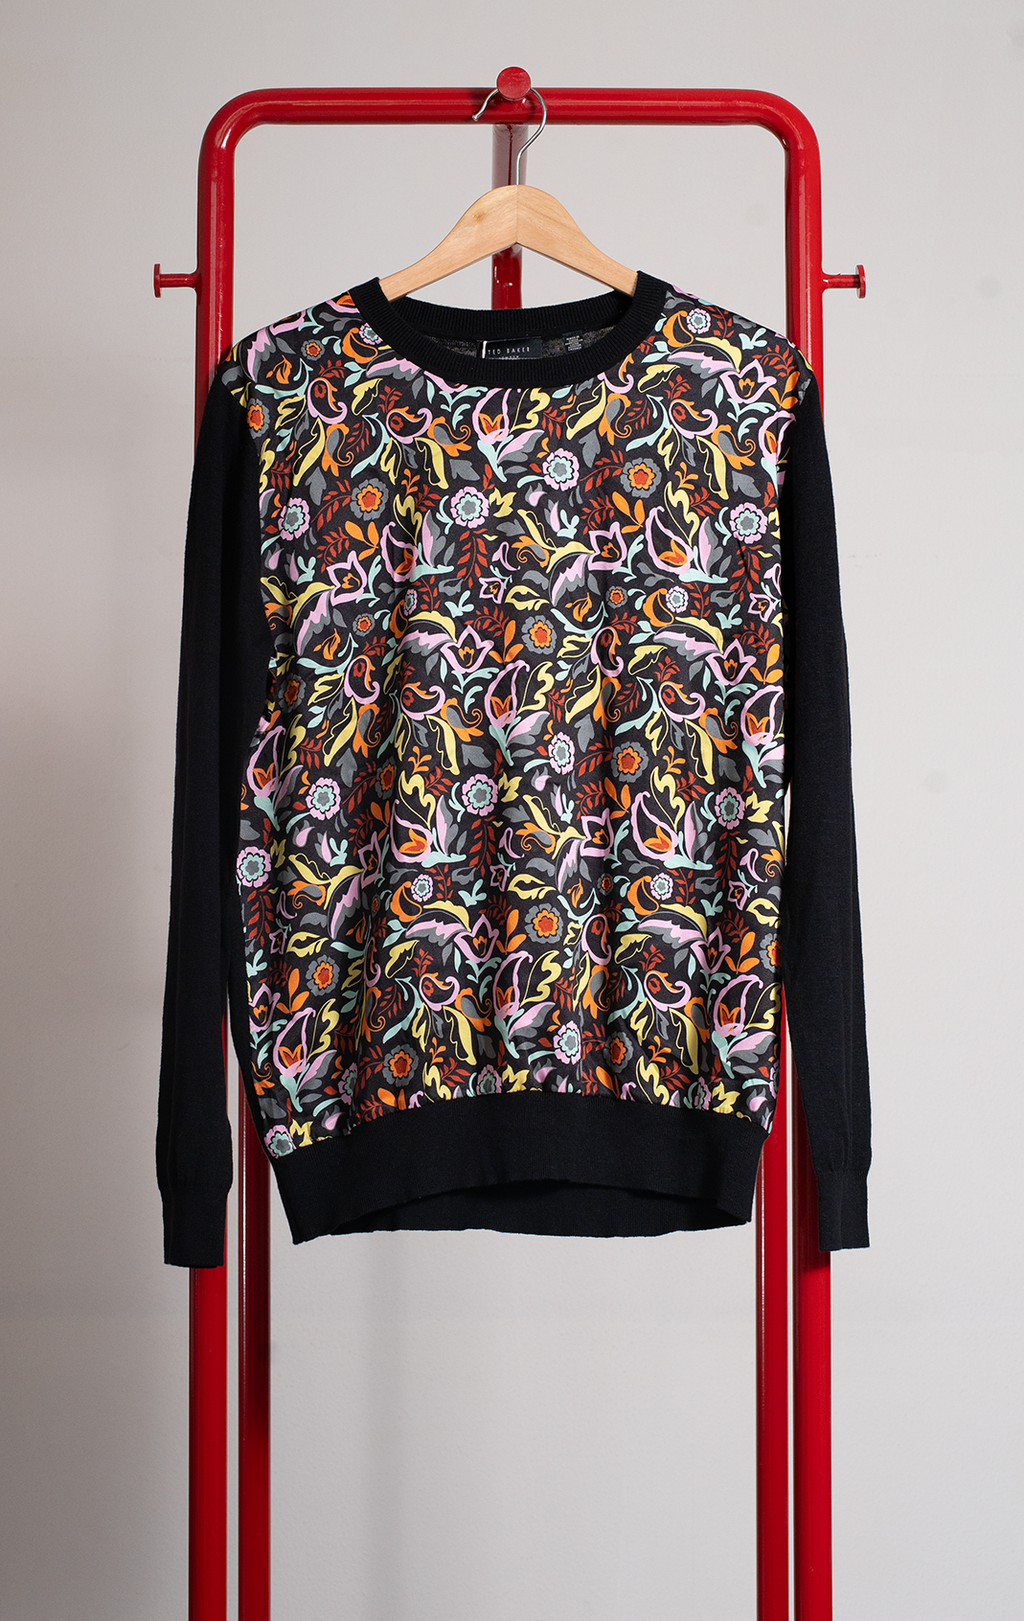 TED BAKER  SWEATER - Black with florals - Medium